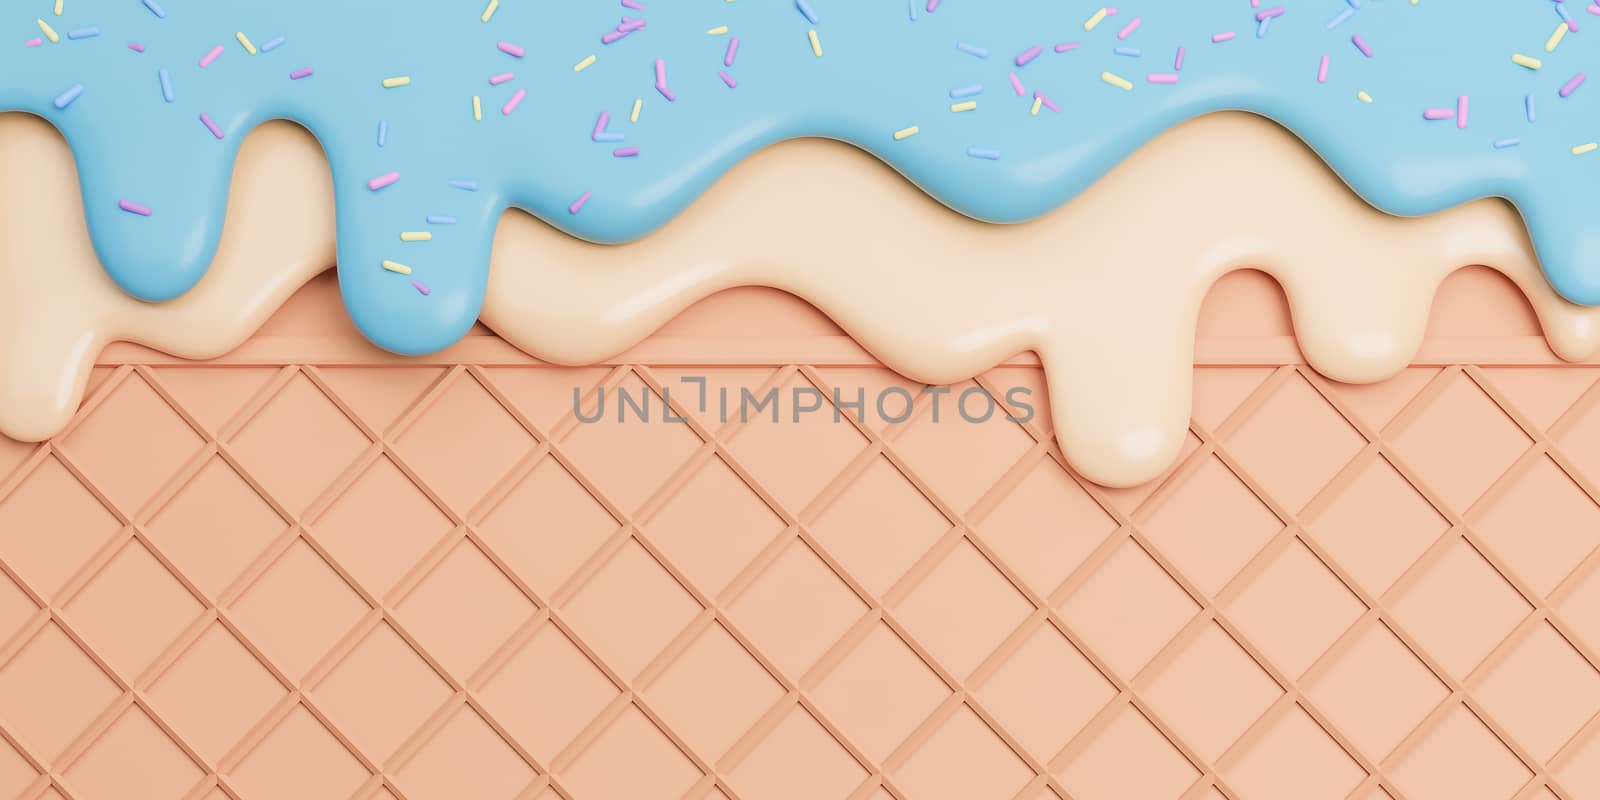 Mint and Vanilla Ice Cream Melted with Sprinkles on Wafer banner Background with copy space.,3d model and illustration. by anotestocker